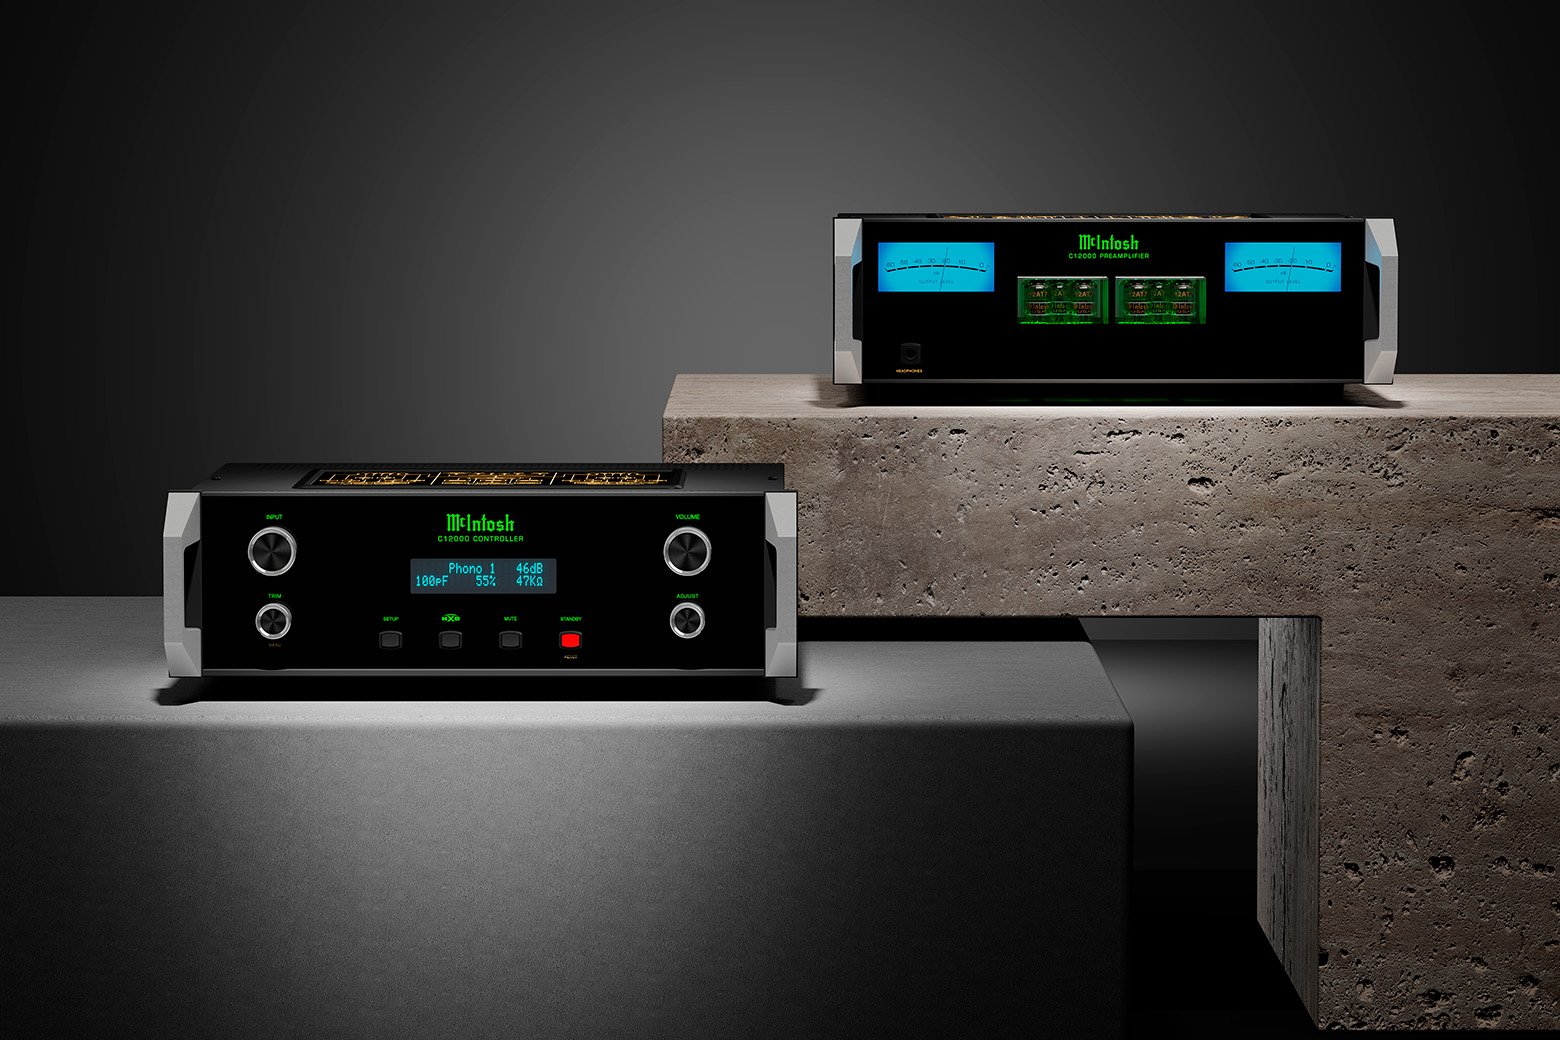 McIntosh C12000 Solid State and Vacuum Tube Preamplifier